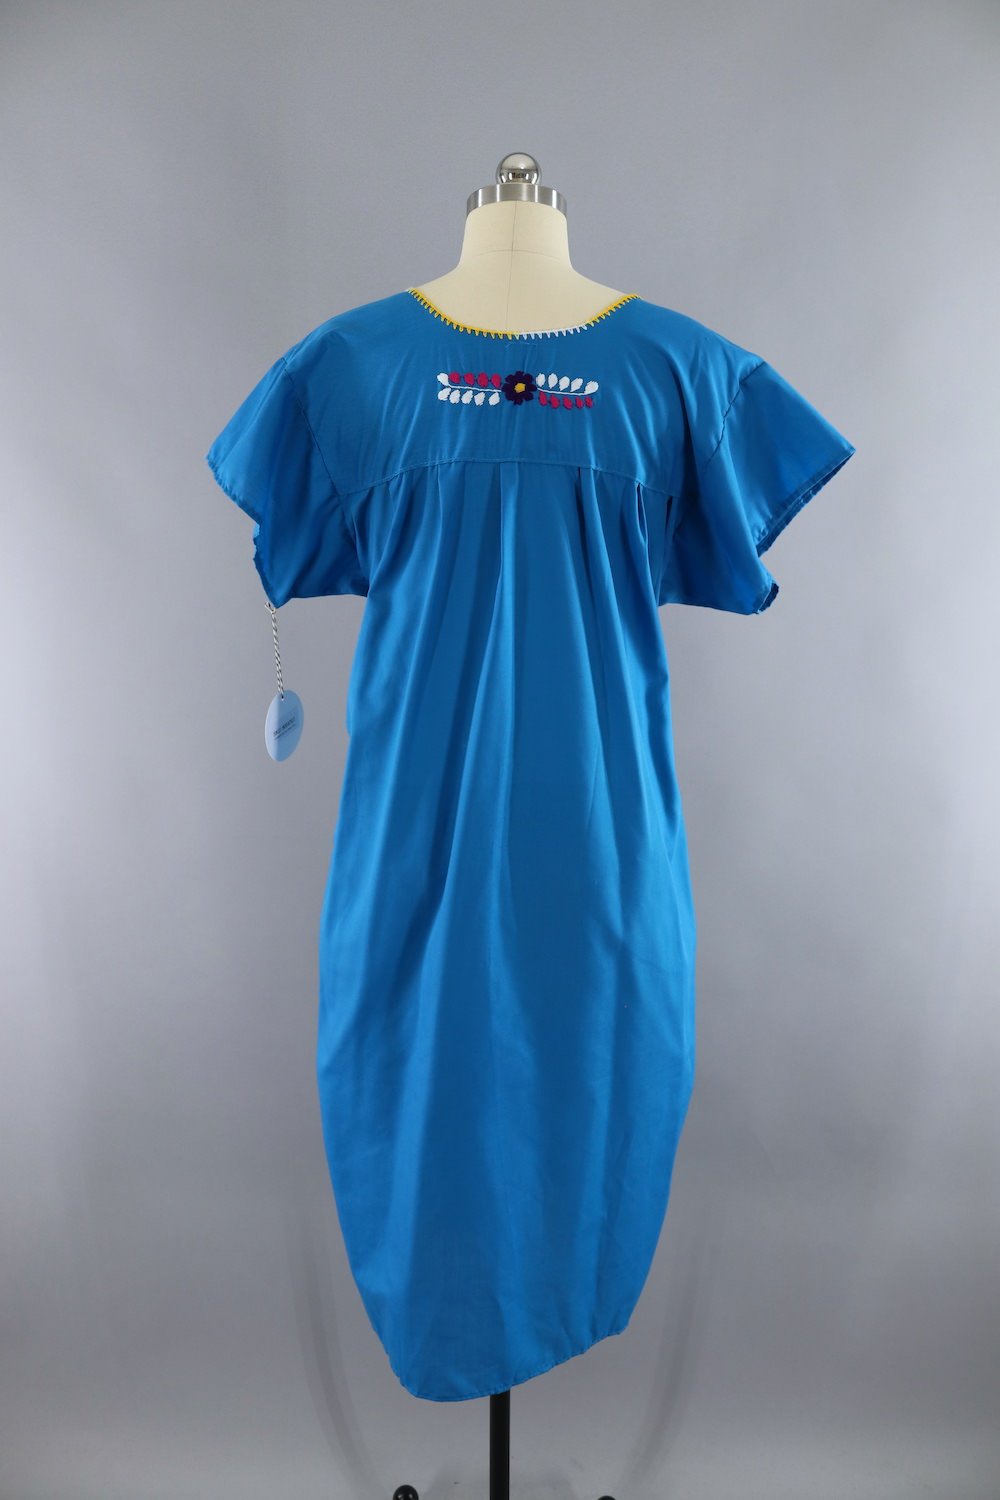 Vintage 1970s Blue Embroidered Mexican Caftan Dress - ThisBlueBird